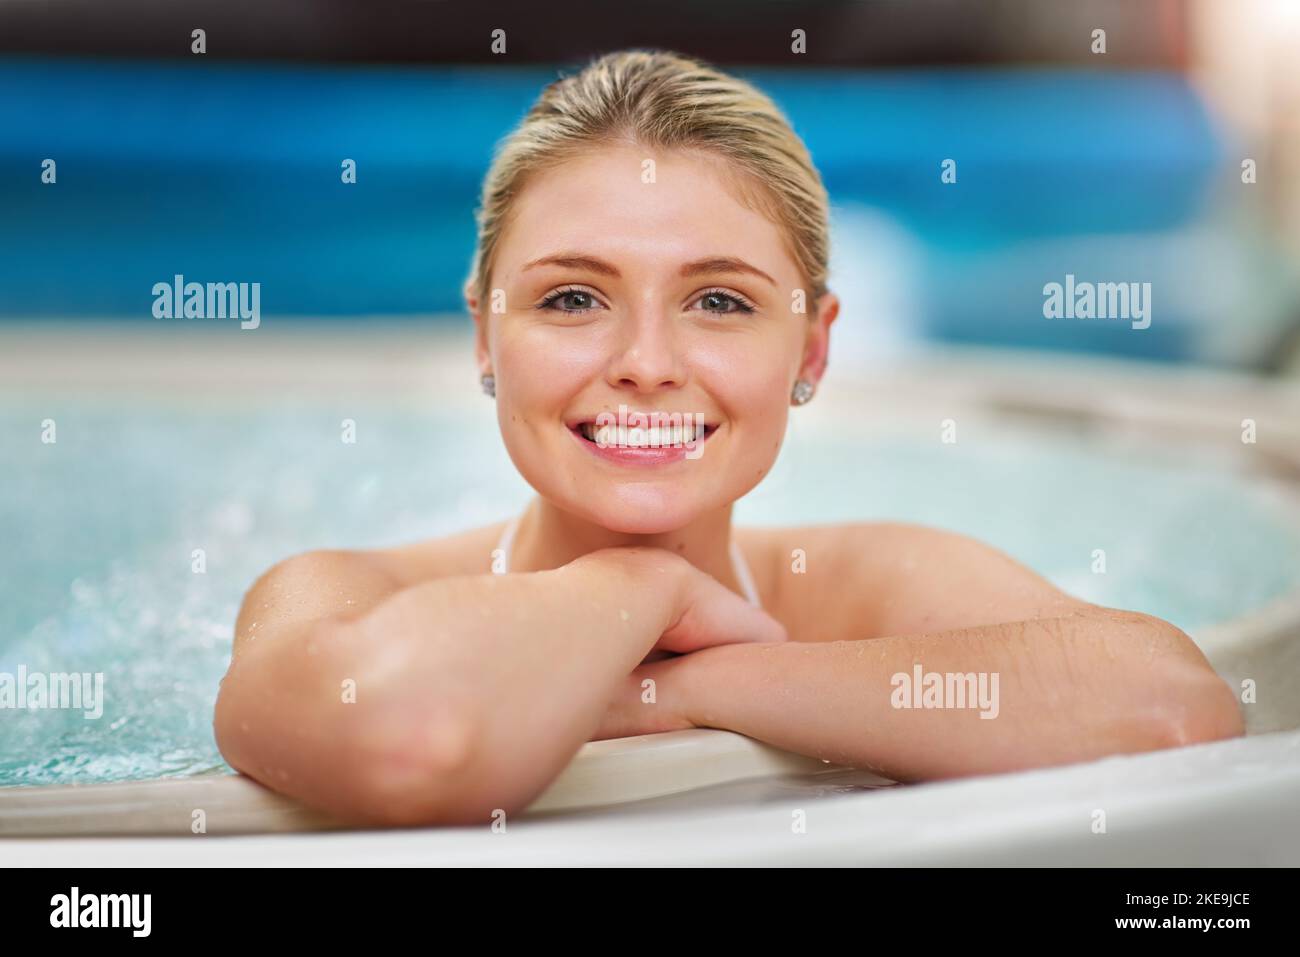 Big Breasted Brunette Woman in the Jacuzzi Stock Photo - Image of female,  person: 28493614